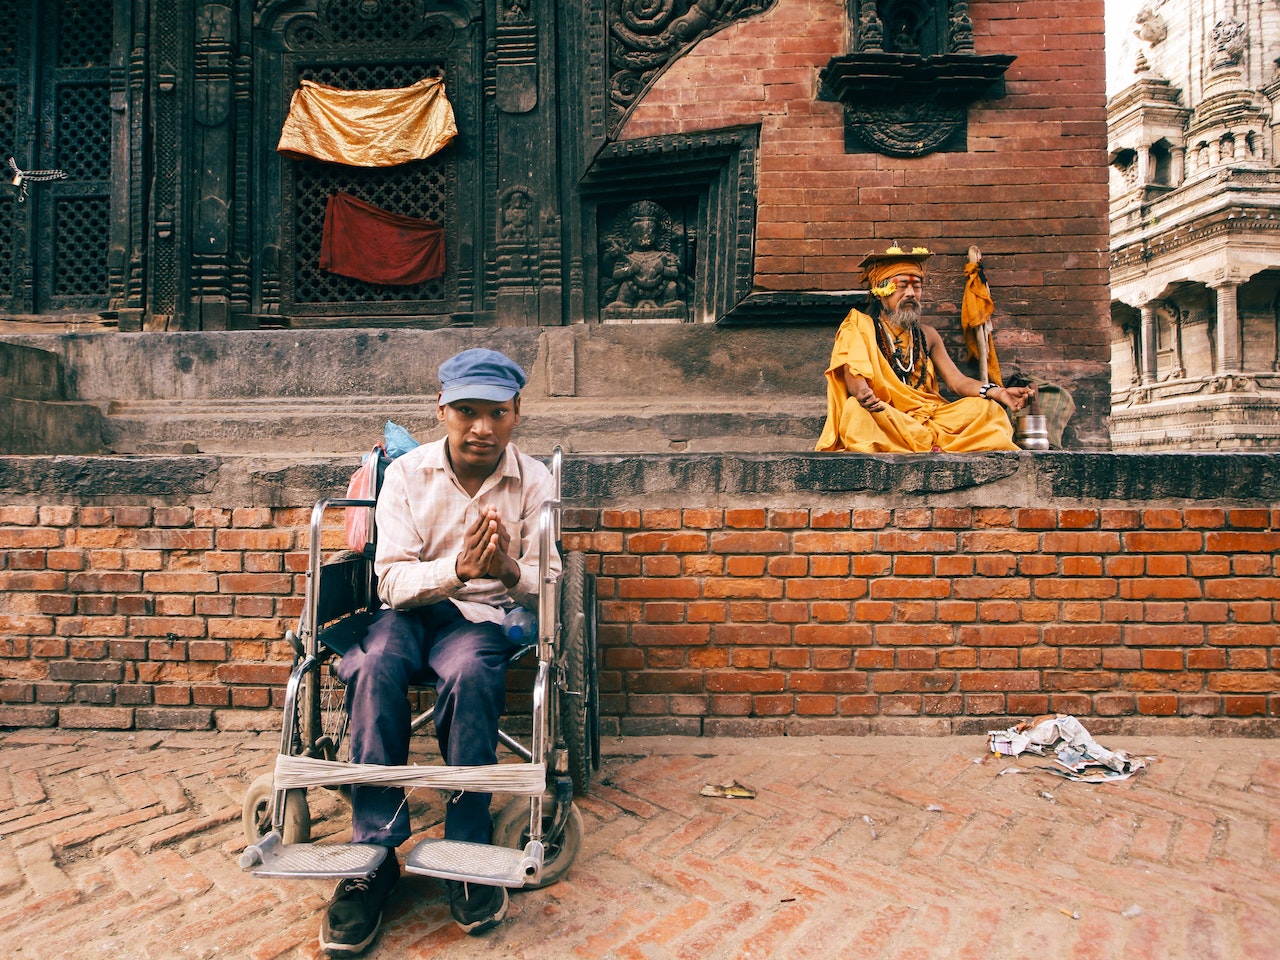 A Man Sitting on the Wheelchair